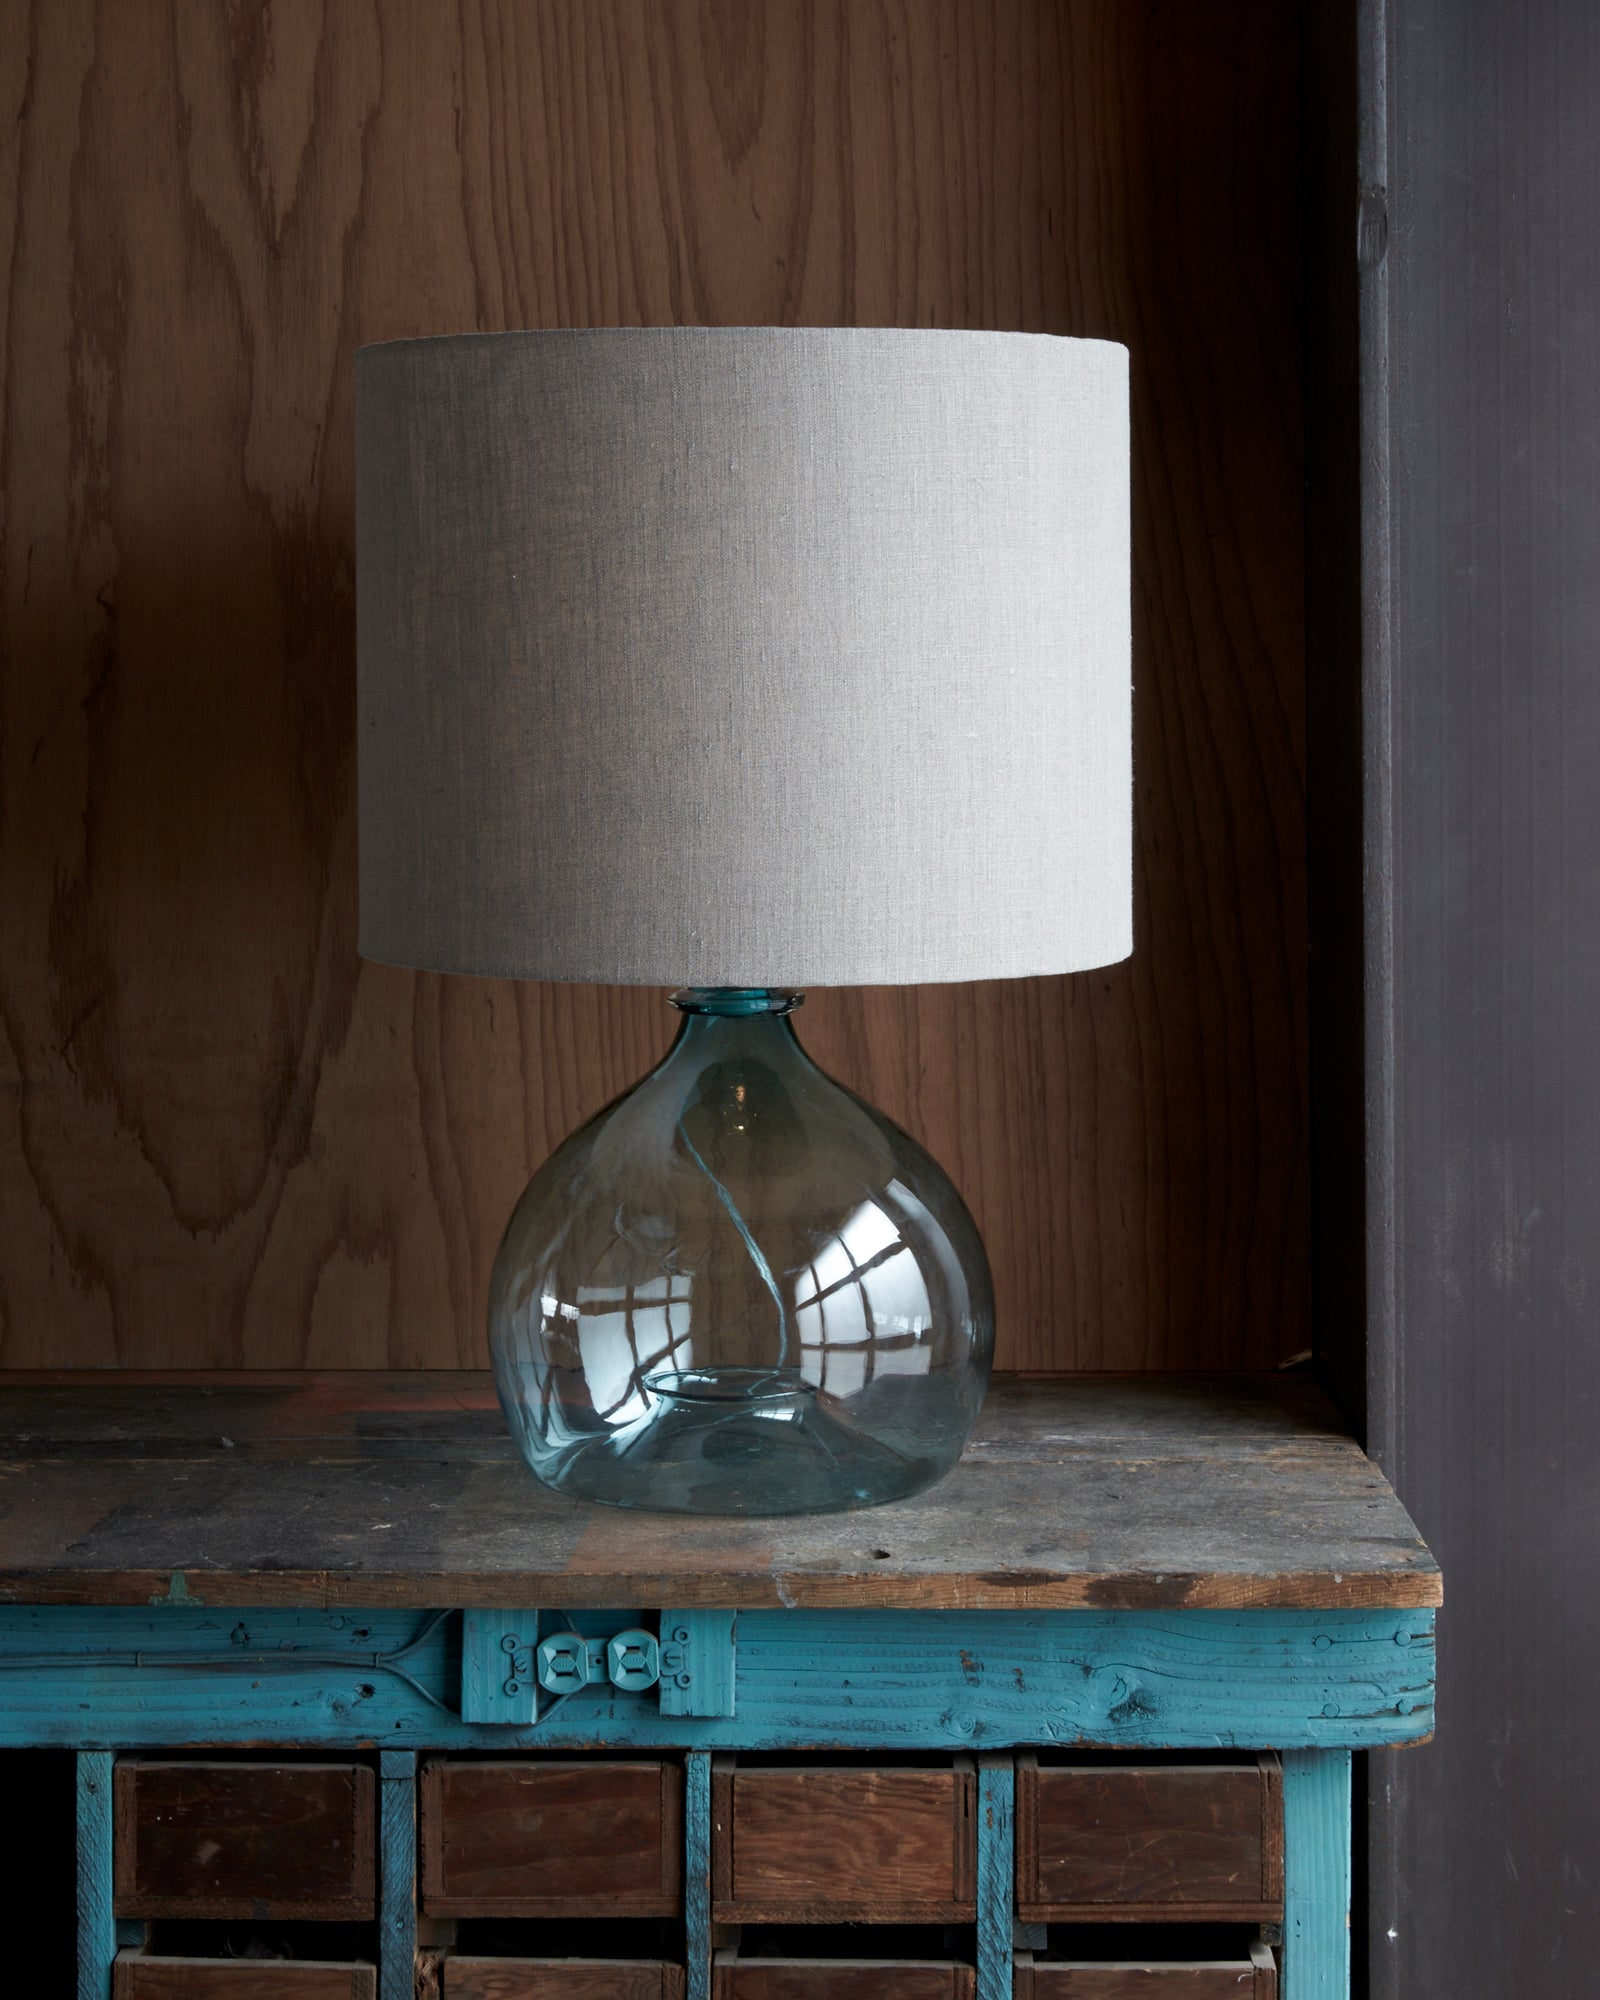  Jug table lamp in turquoise finish with white fabric lamp shade.  